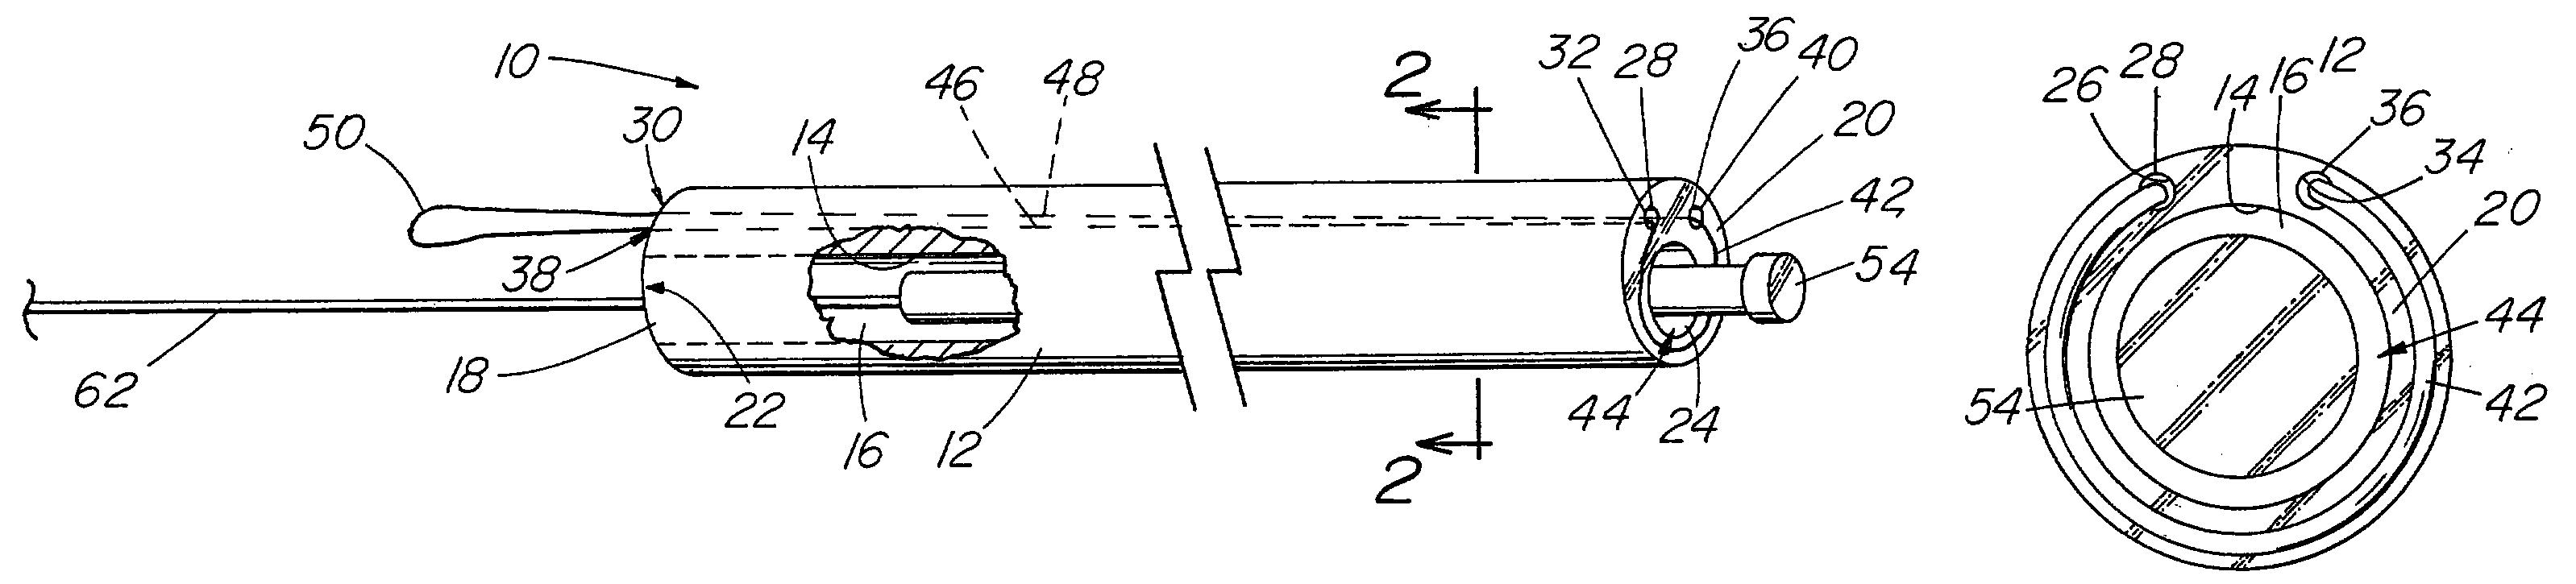 Device for removing an elongated structure implanted in biological tissue